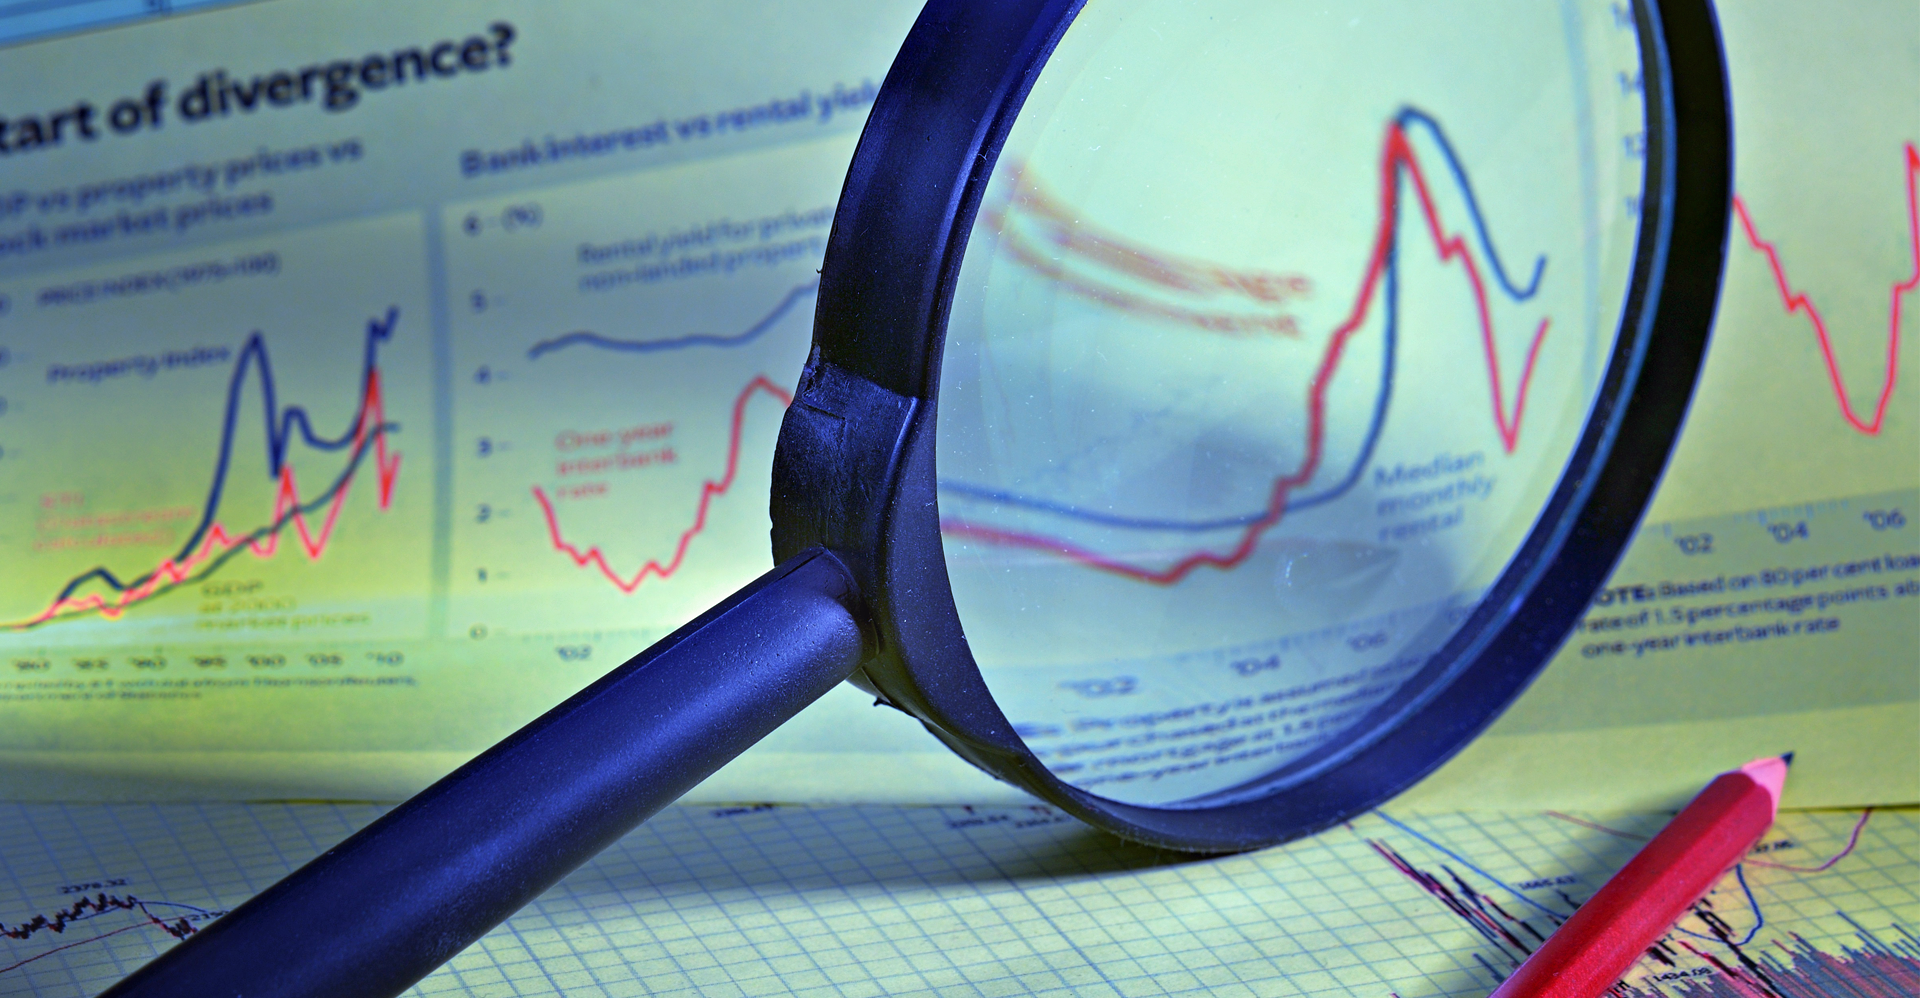 Magnifying glass over financial graphs